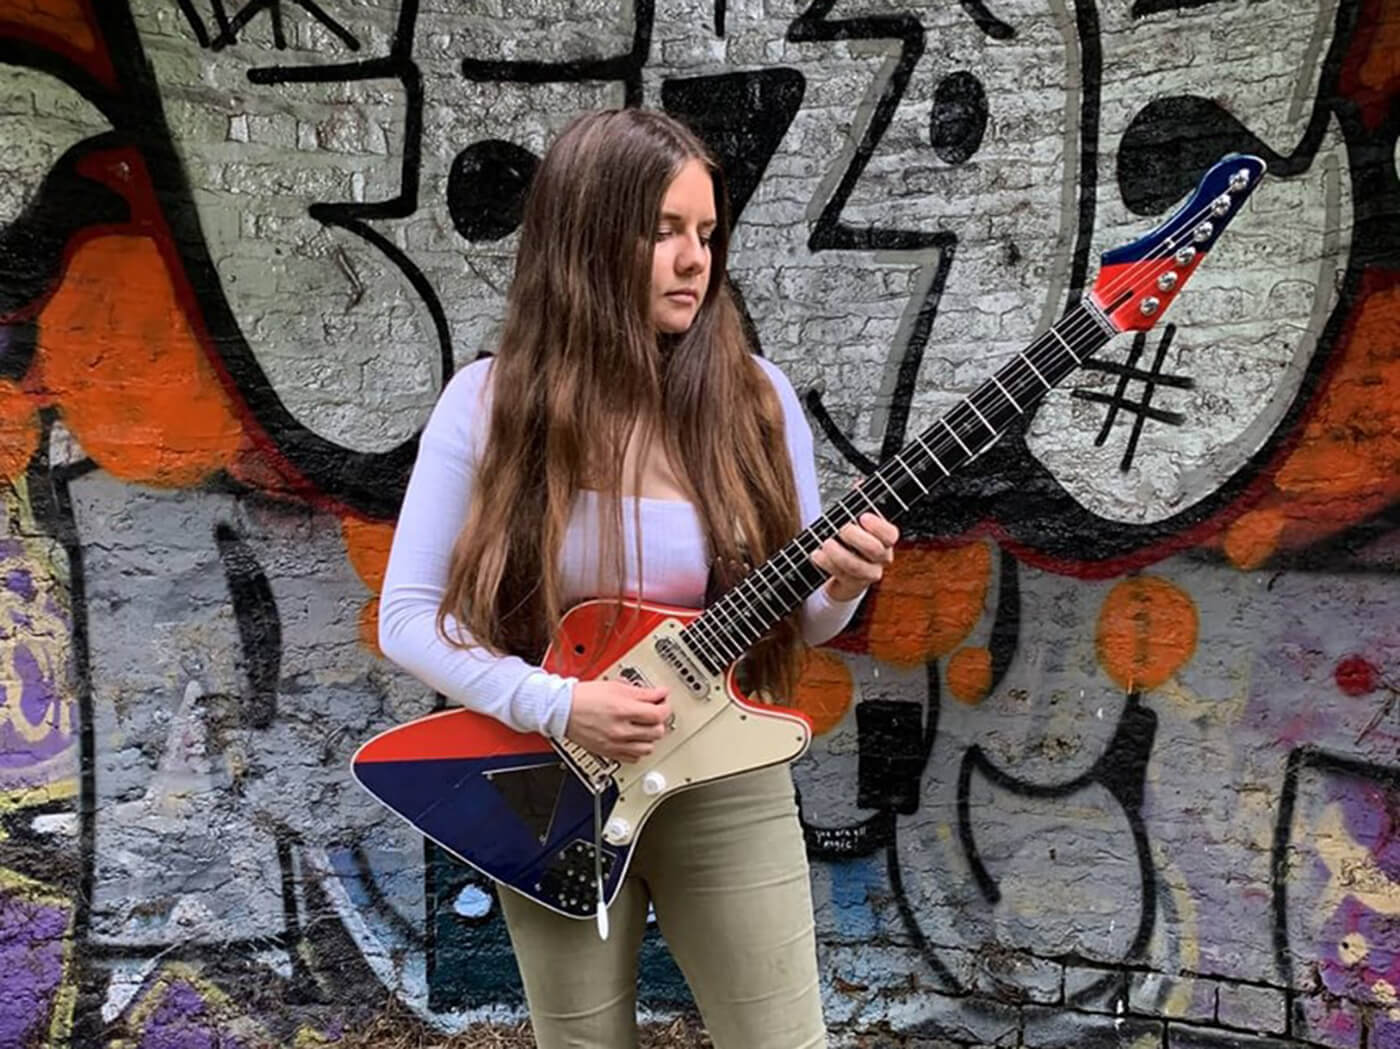 Arielle with prototype Brian May guitar